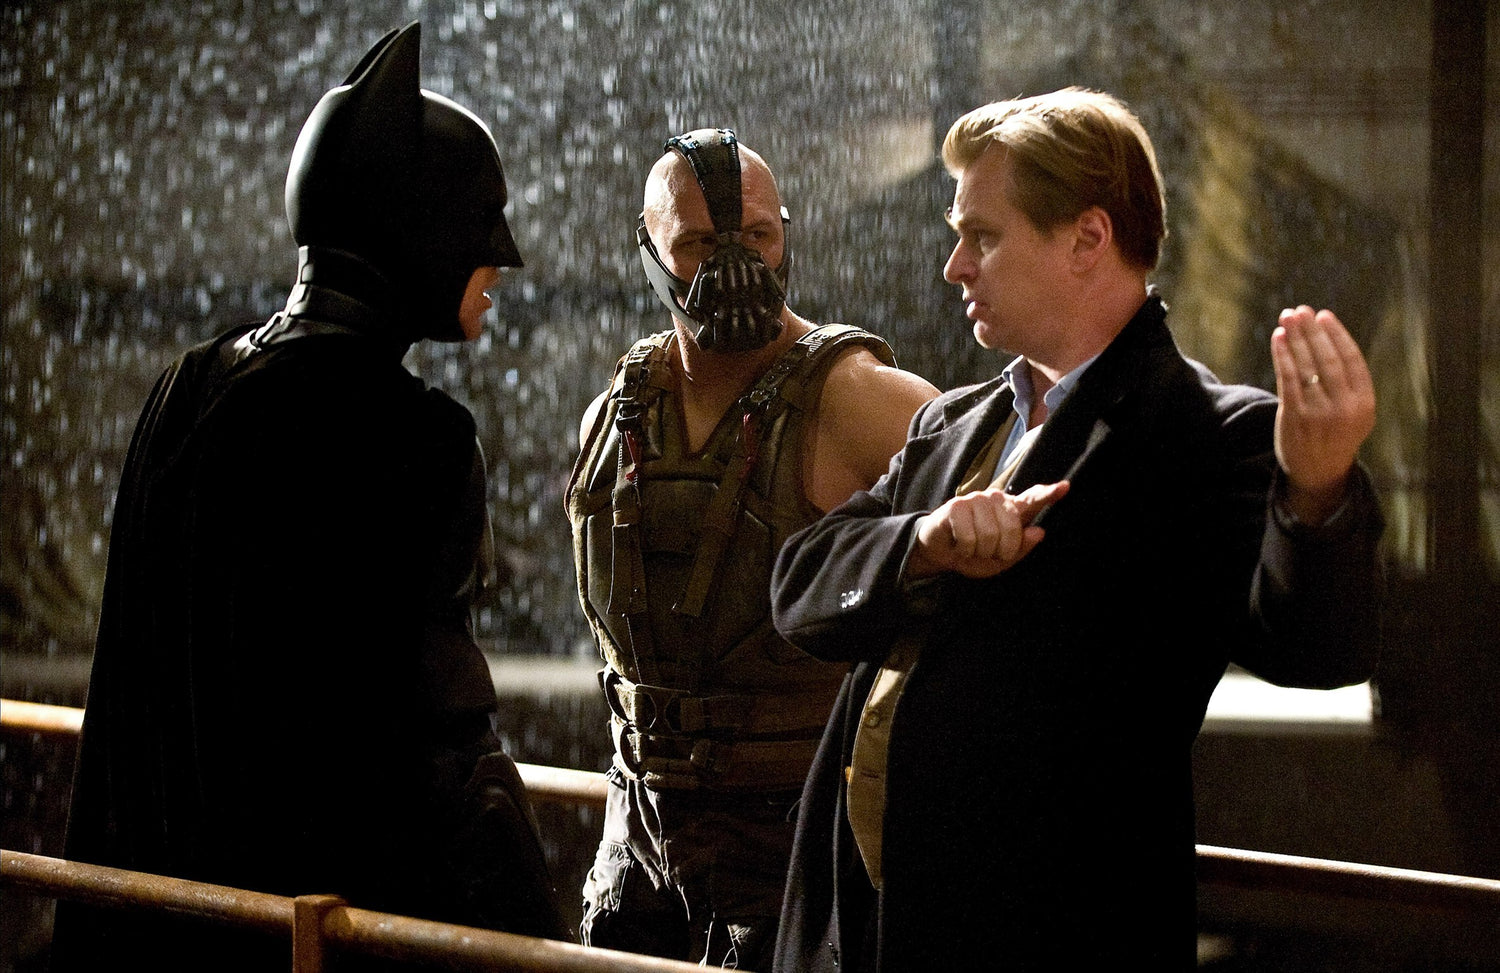 The Fire Rises: The Creation and Impact of The Dark Knight documents the Christopher Nolan Batman trilogy